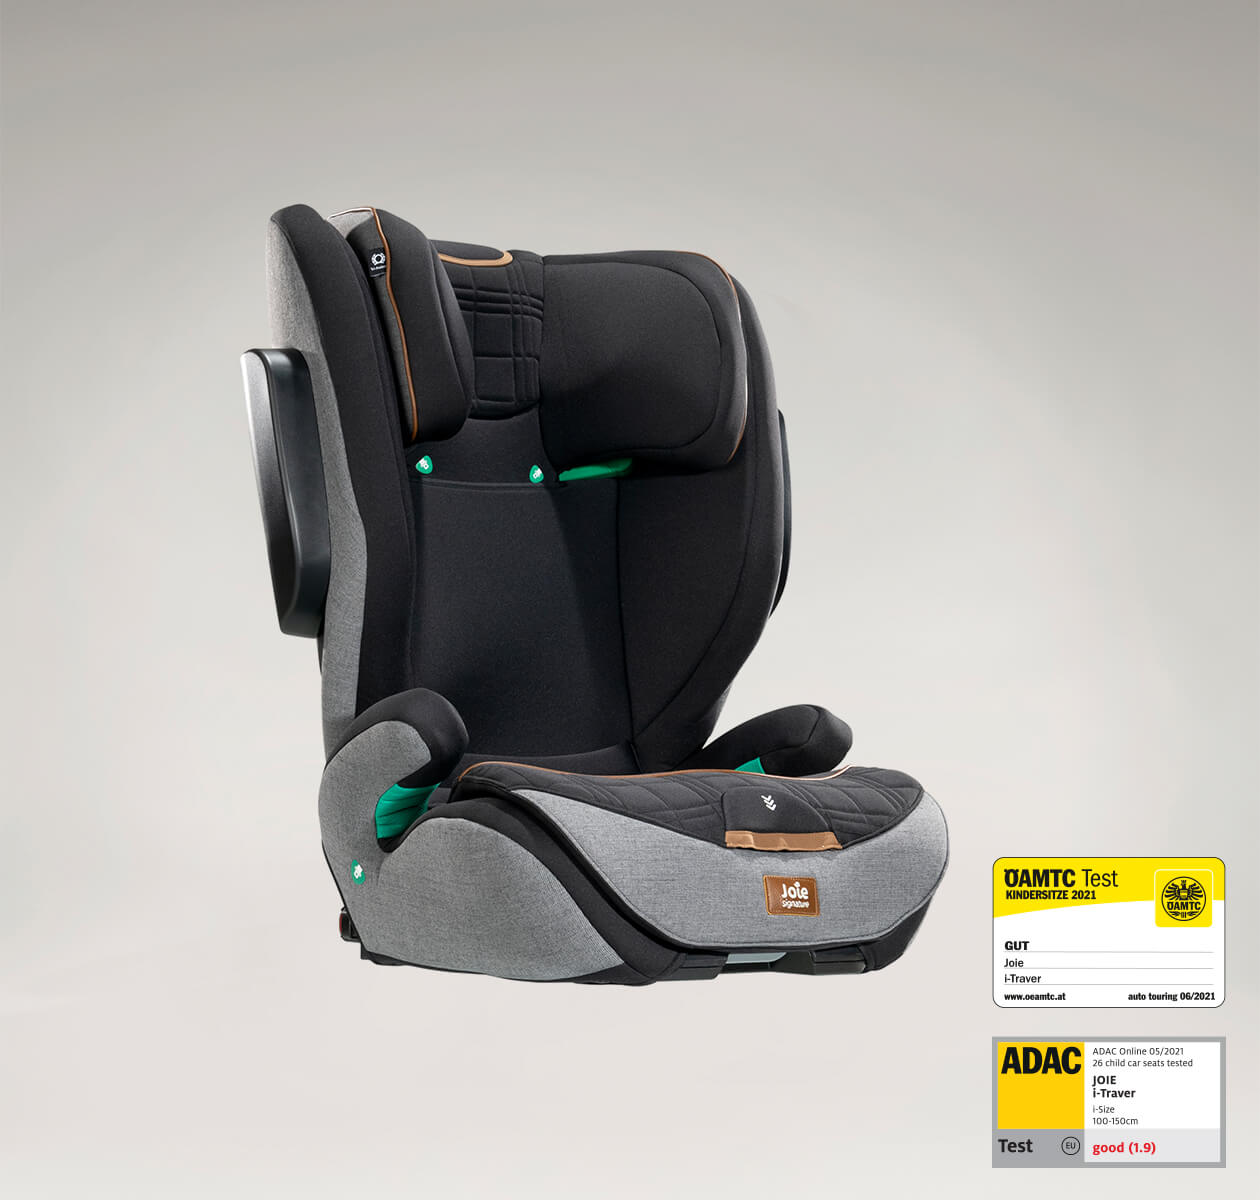  Joie i-Traver booster seat in black and gray at an angle, with the ADAC and OAMTC test labels in the lower right corner.